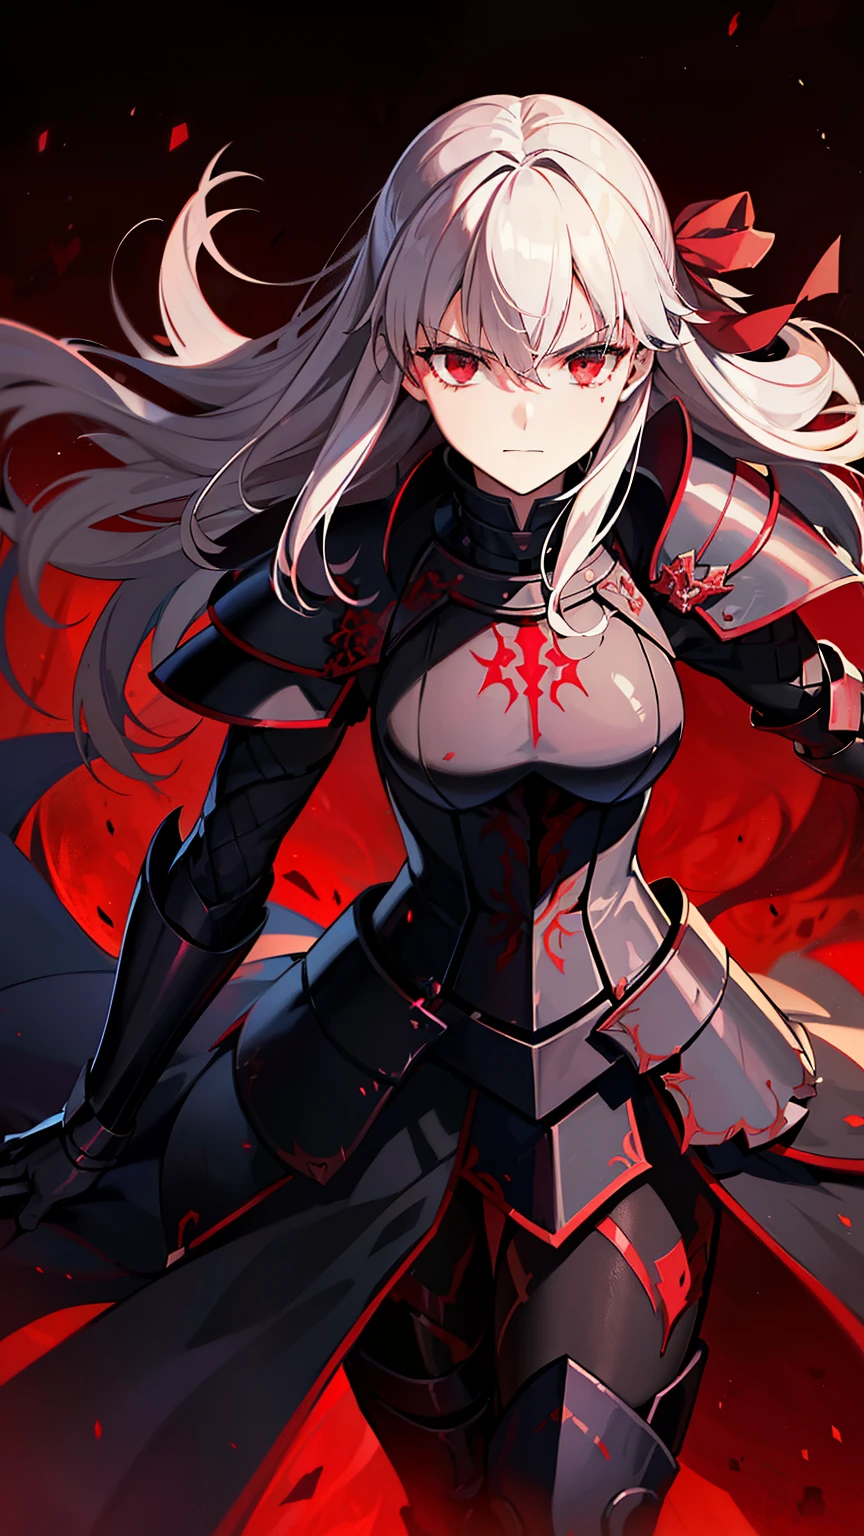 (high-quality, breathtaking),(expressive eyes, perfect face) 1female, girl , solo, young adult, long hair length, wavy curly hair, soft wave, black hair color, red highlights in hair, deep red eye color, background, music, serious expression, haunting red background, armor, onyx black armor with red trim, midnight dark armor with red cracks engraved in the exterior, saber alter, alter saber fate stay night, corrupted theme, corrupted armor, red lines on armor, conquerer vibe, red markings on armor
